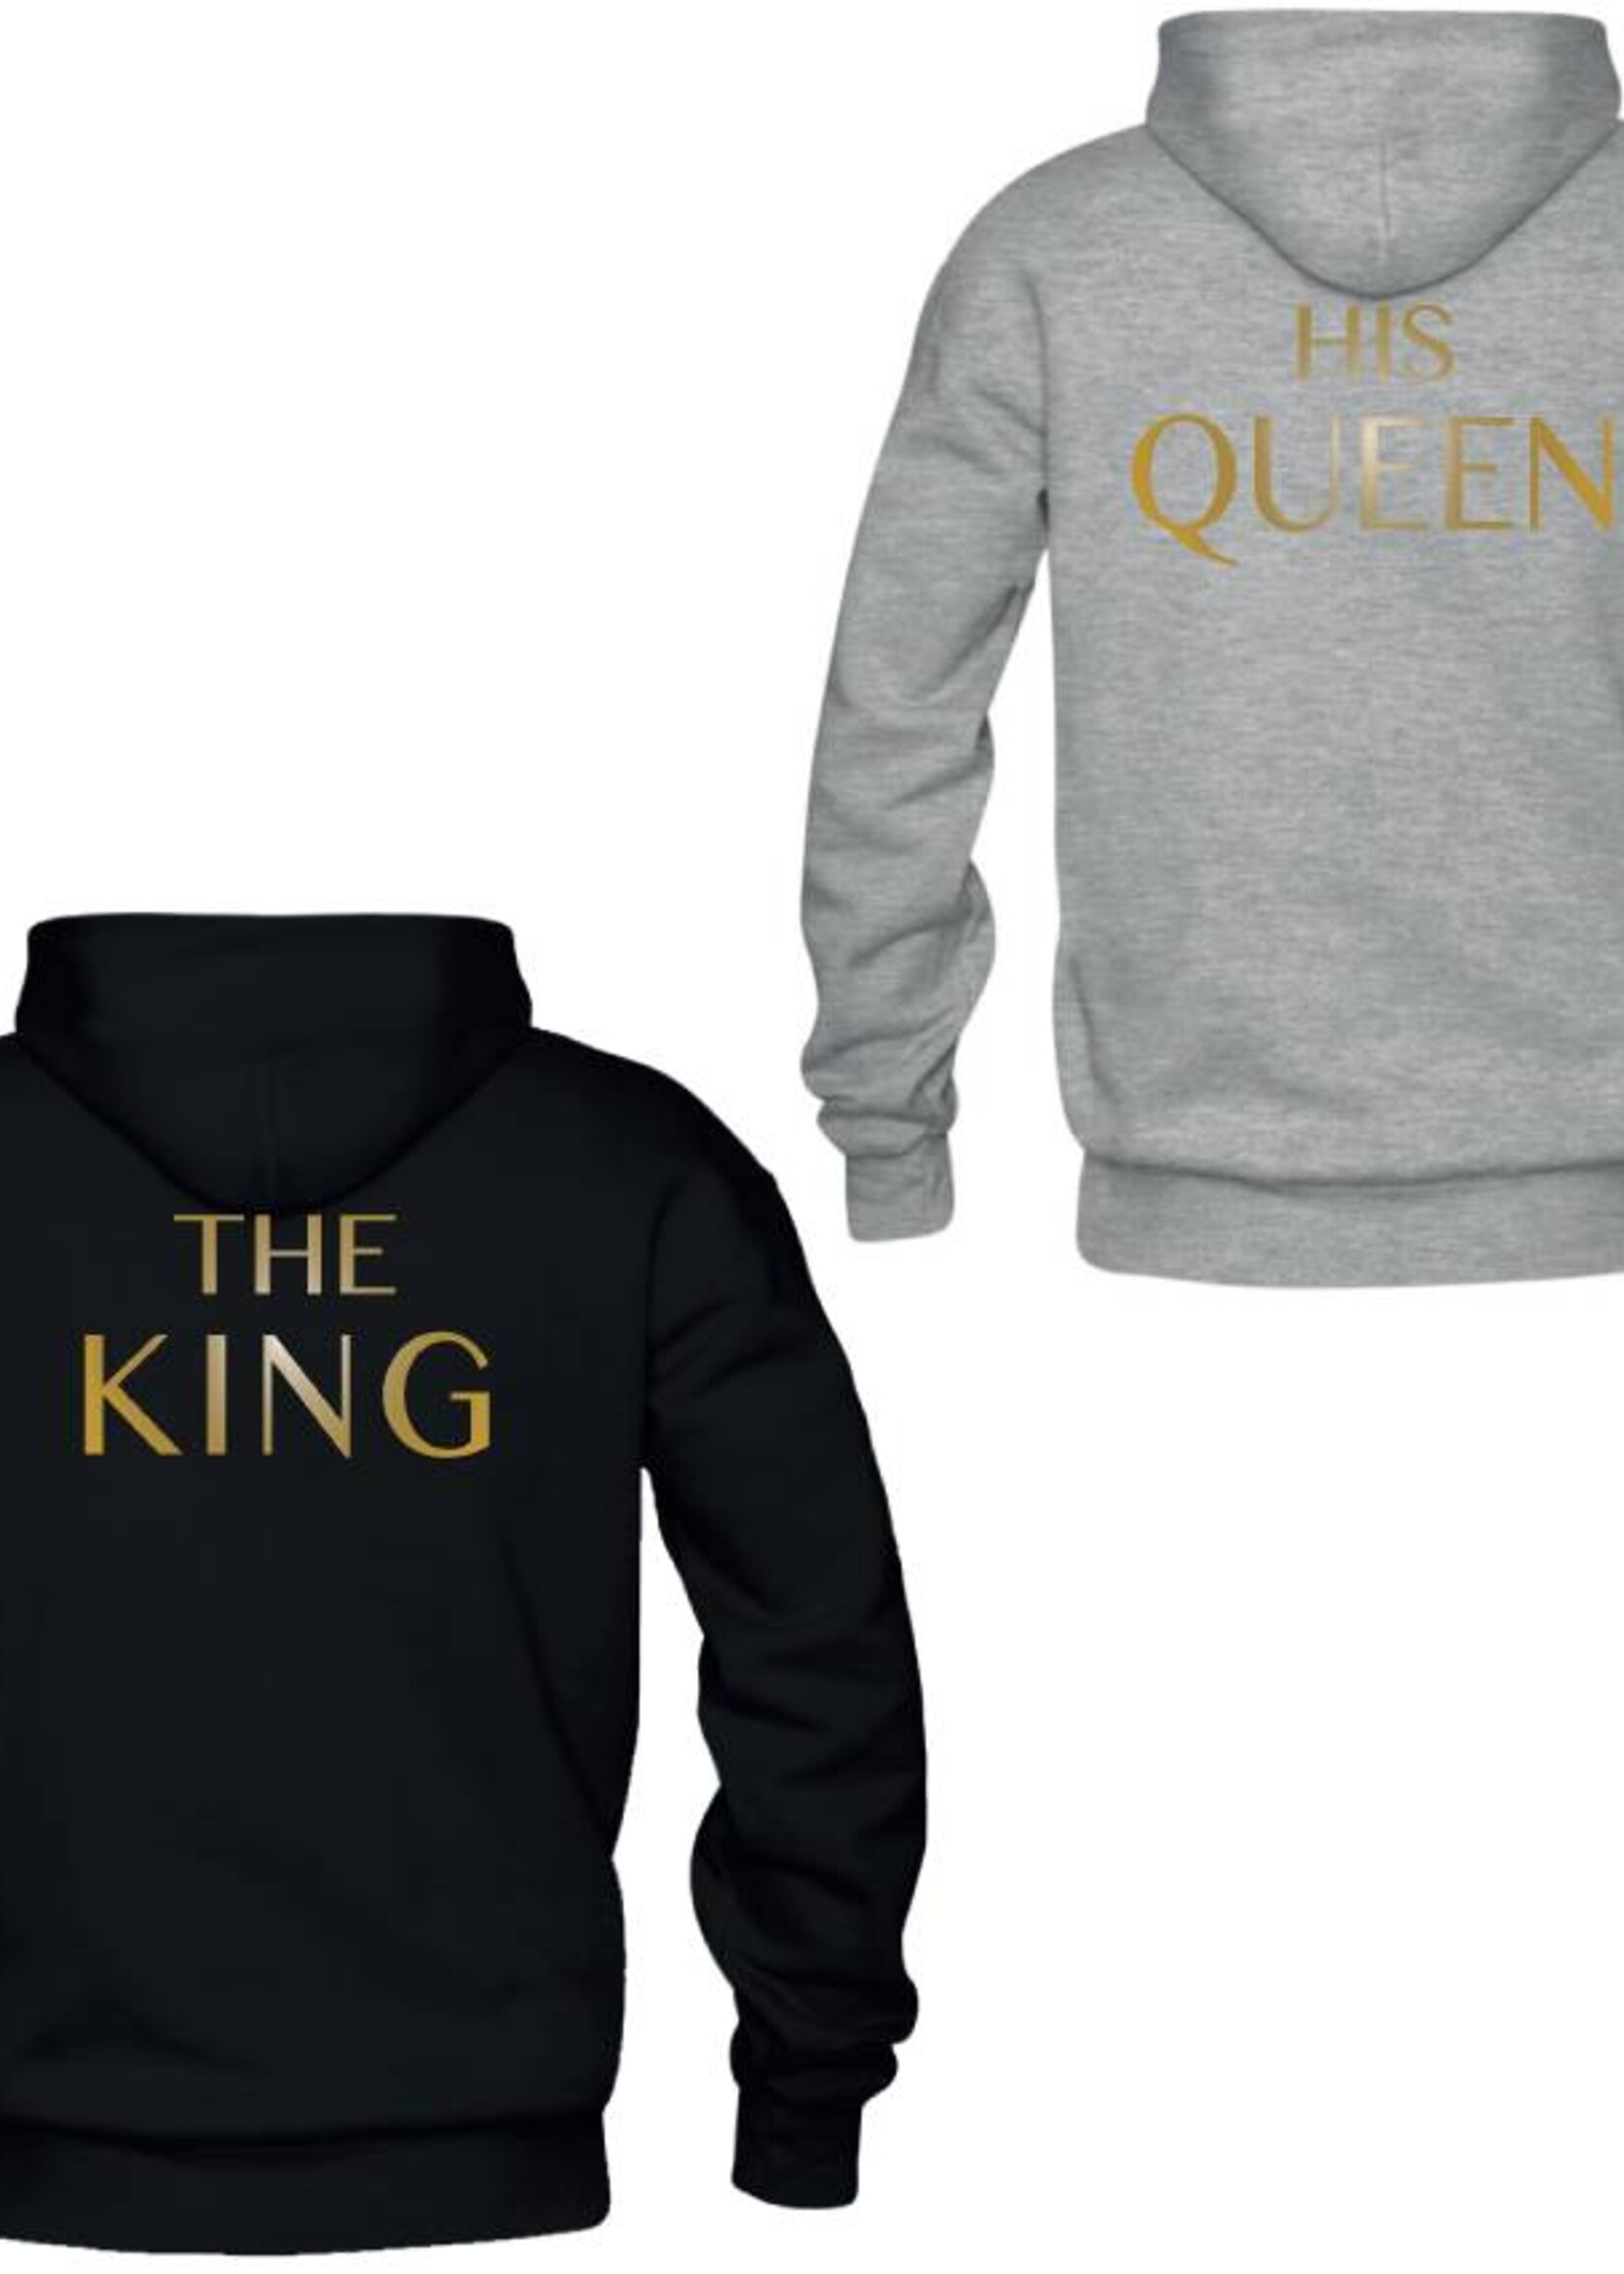 THE KING & HIS QUEEN COUPLE HOODIES GOLD EDITION